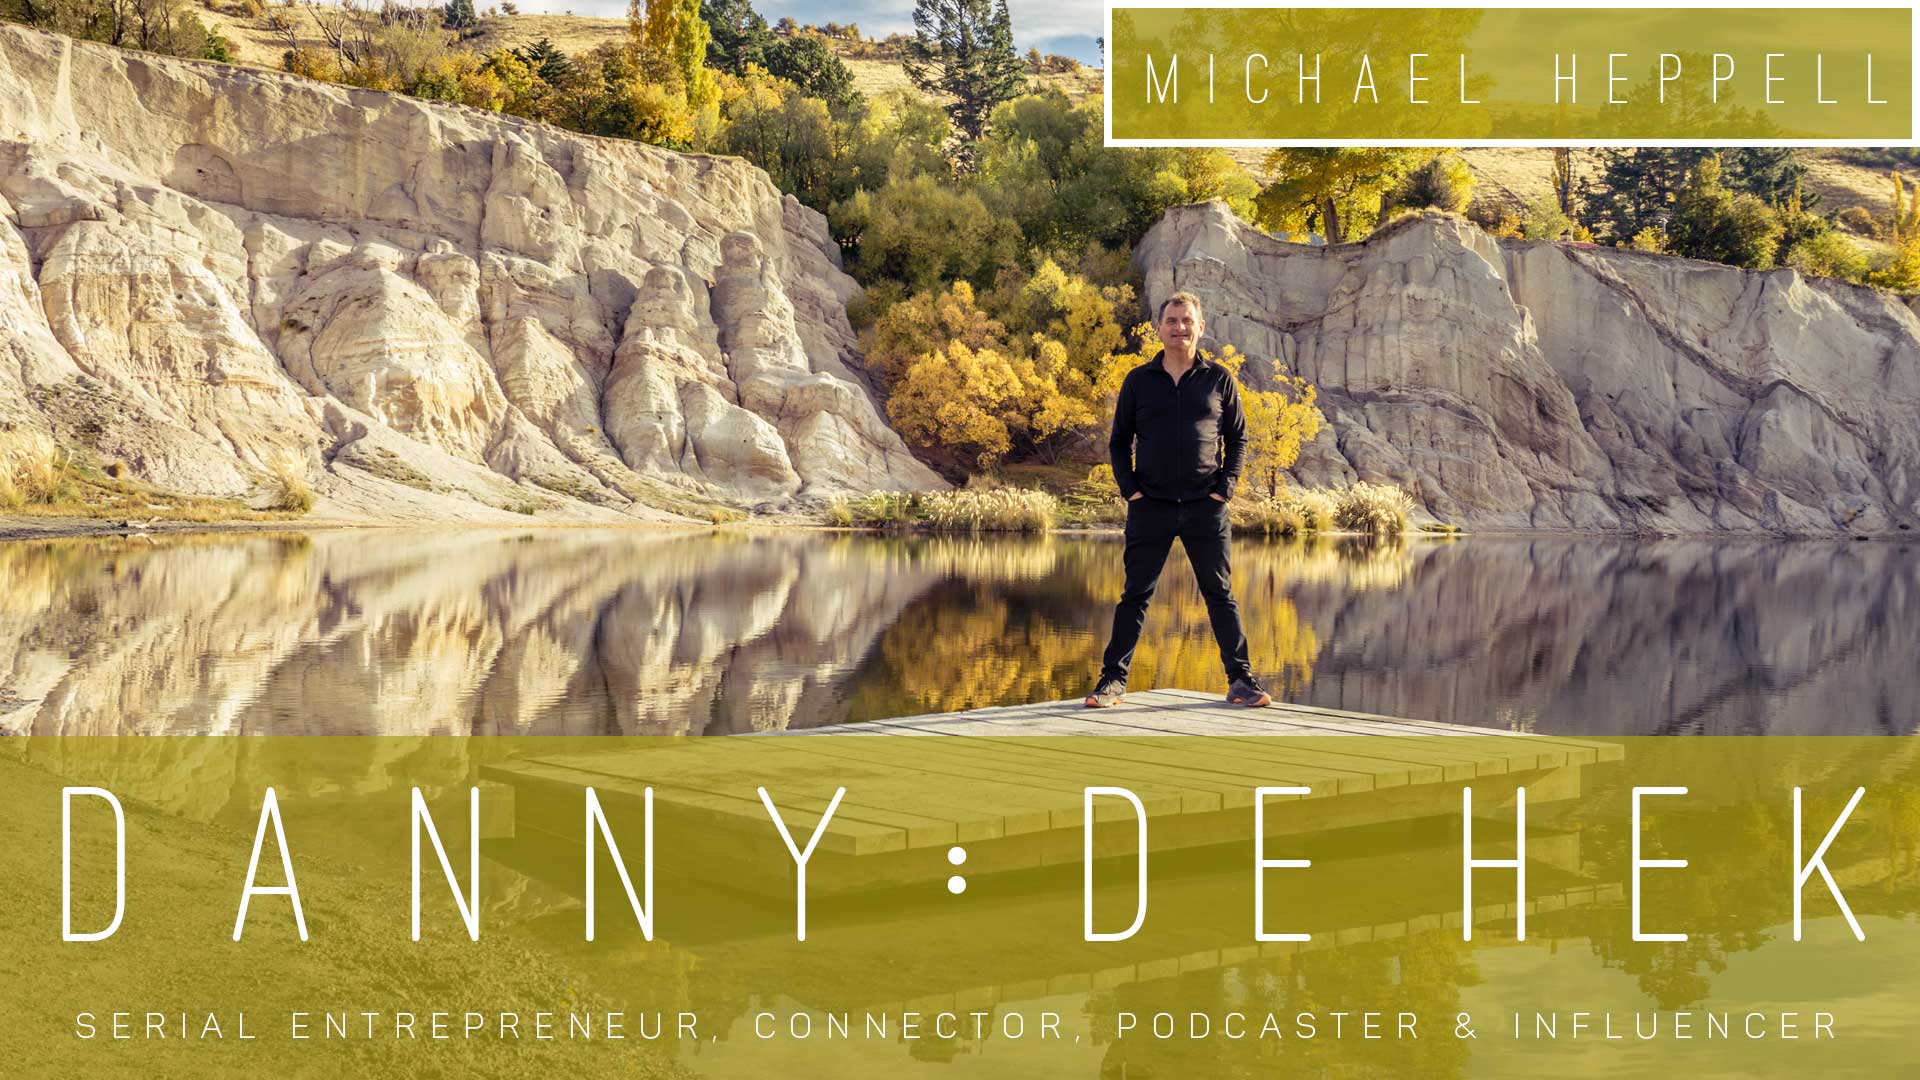 WHAT DE HEK Podcast 12 Questions with Michael Heppellnbsp› Entrepreneur Decision Maker Connector Podcaster Educator